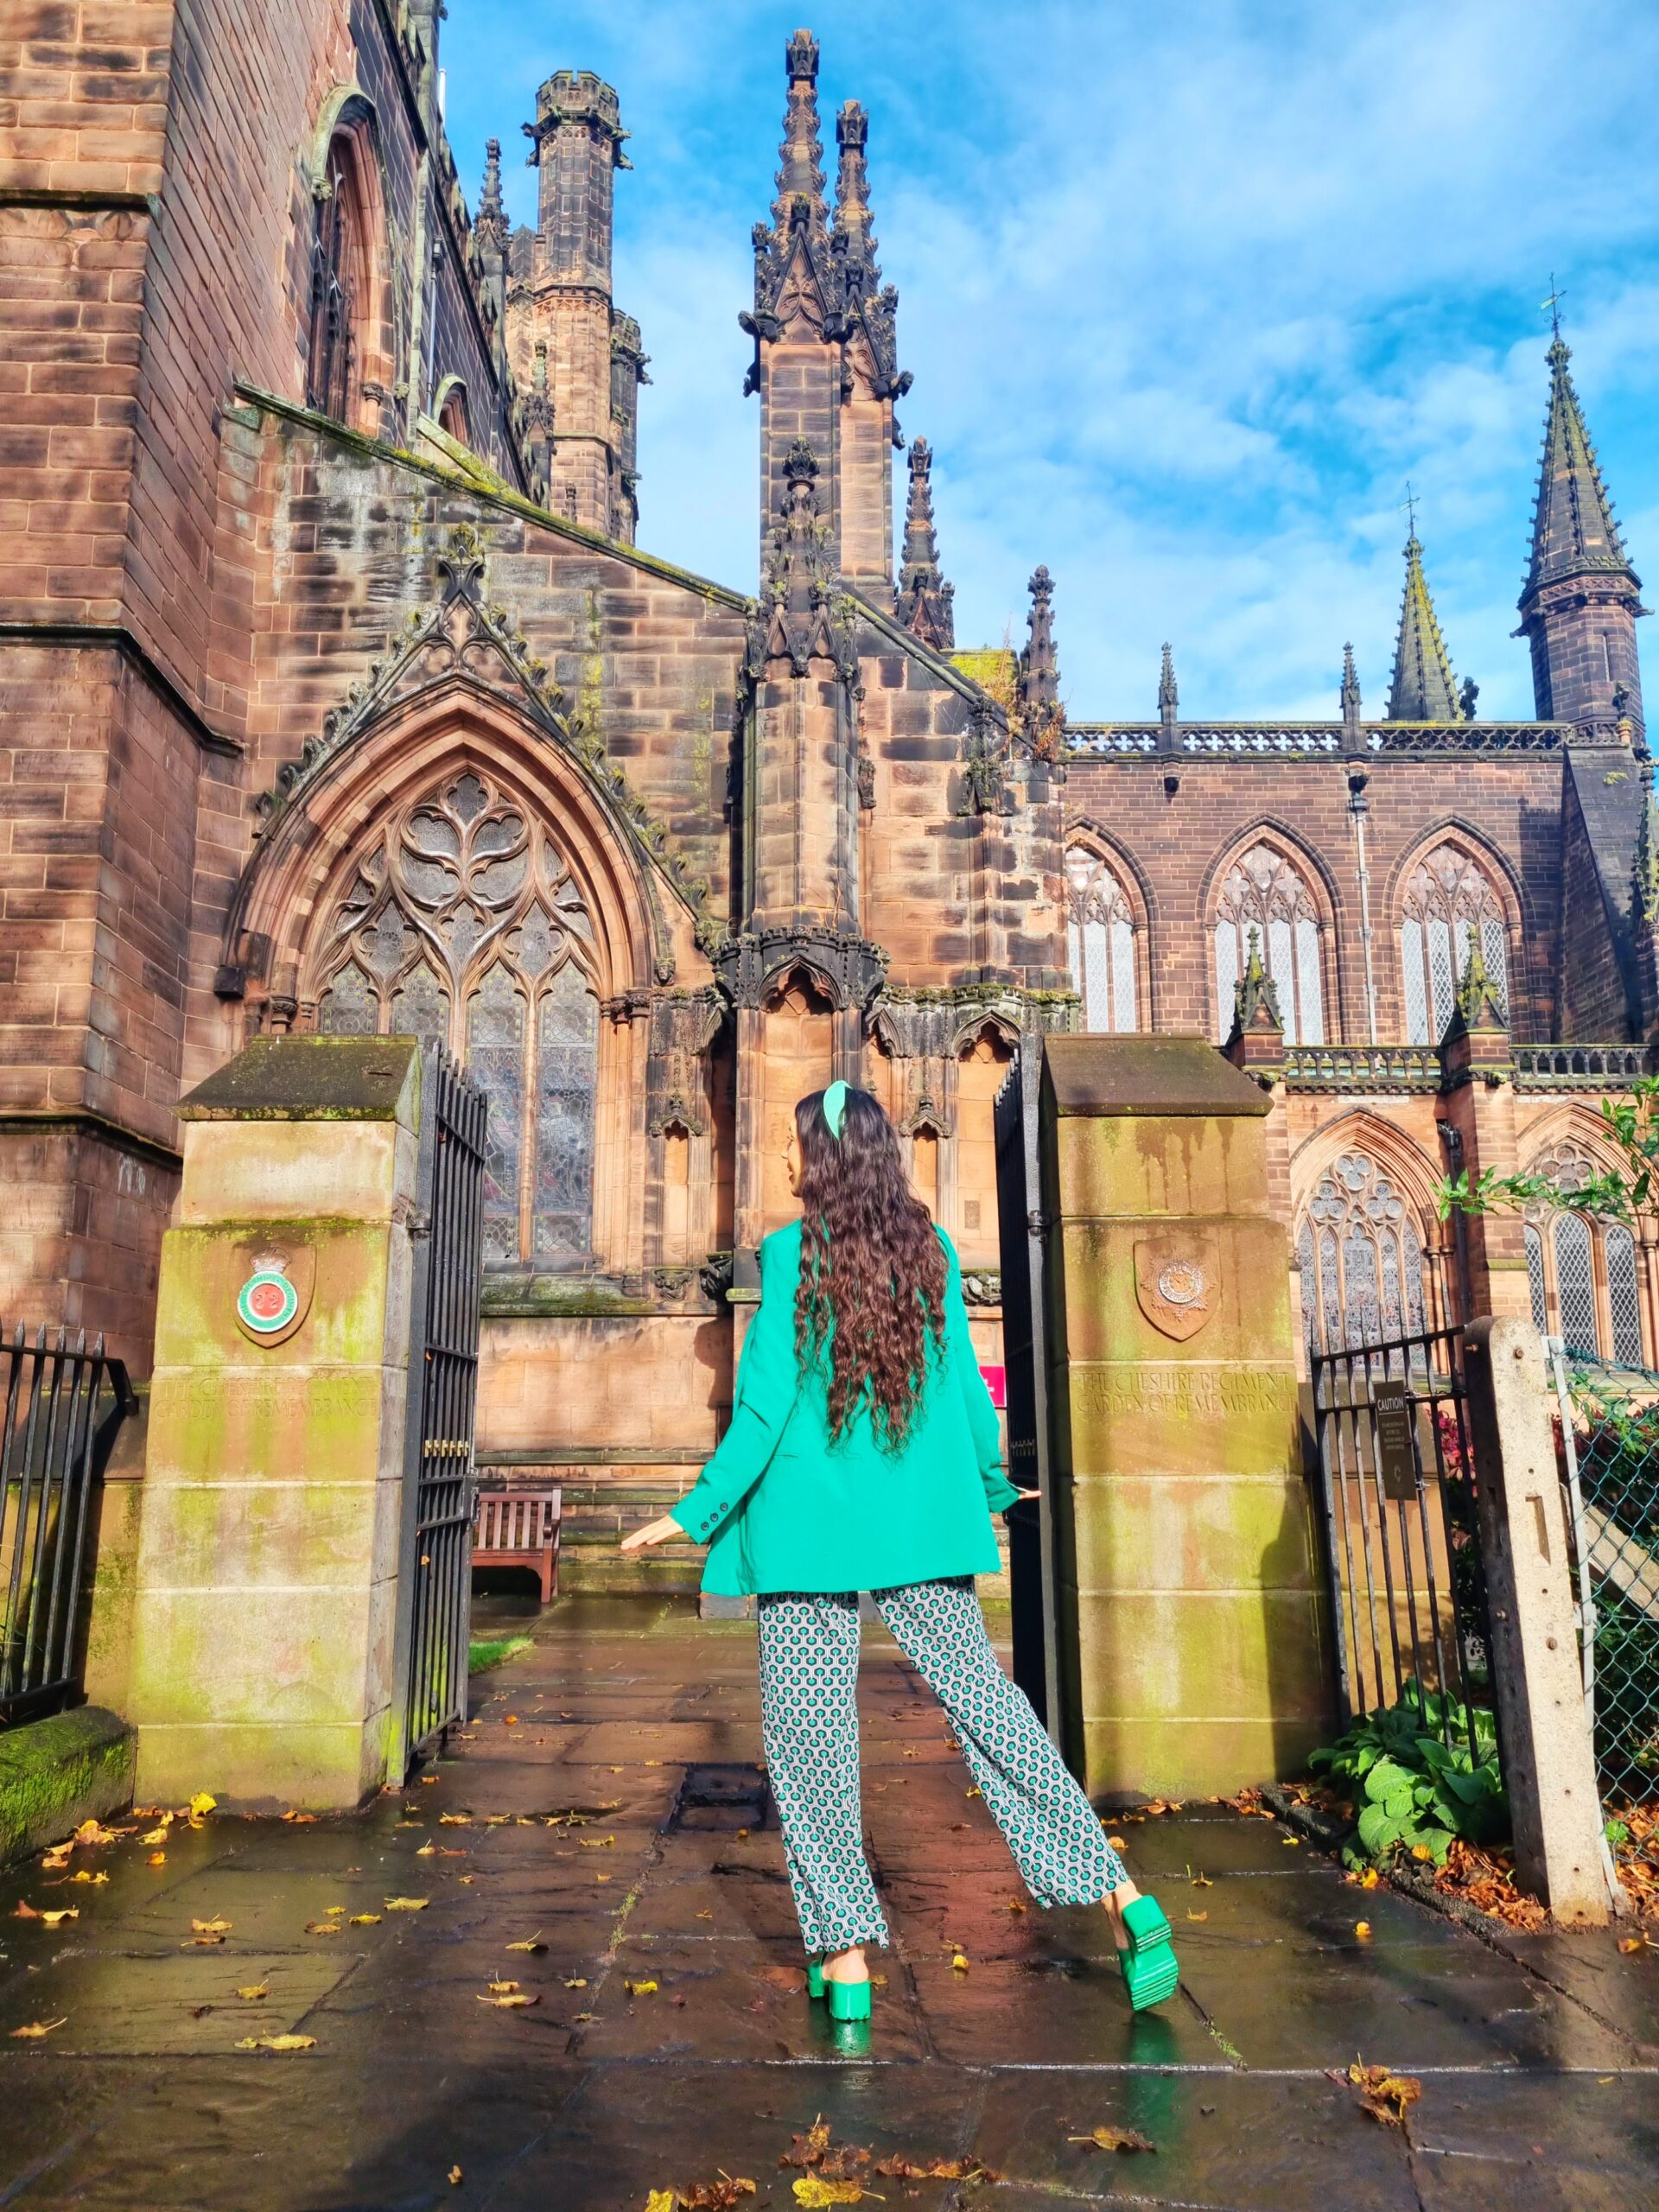 <img src="ana.jpg" alt="ana walking into chester cathedral"/>